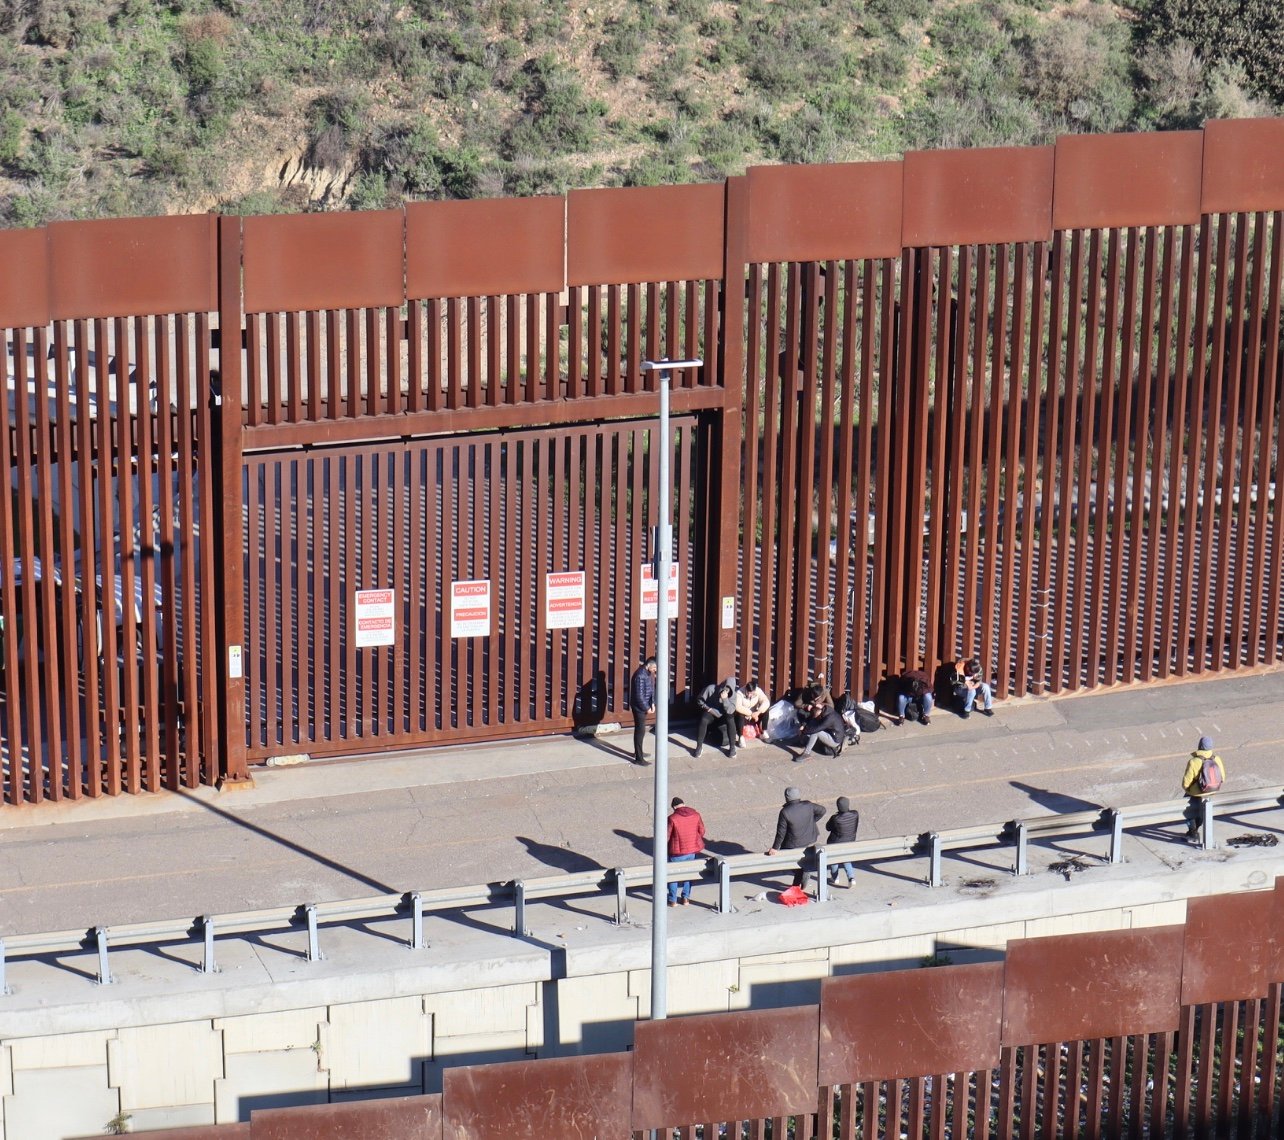 Migrants cross illegally through the wall into the United States